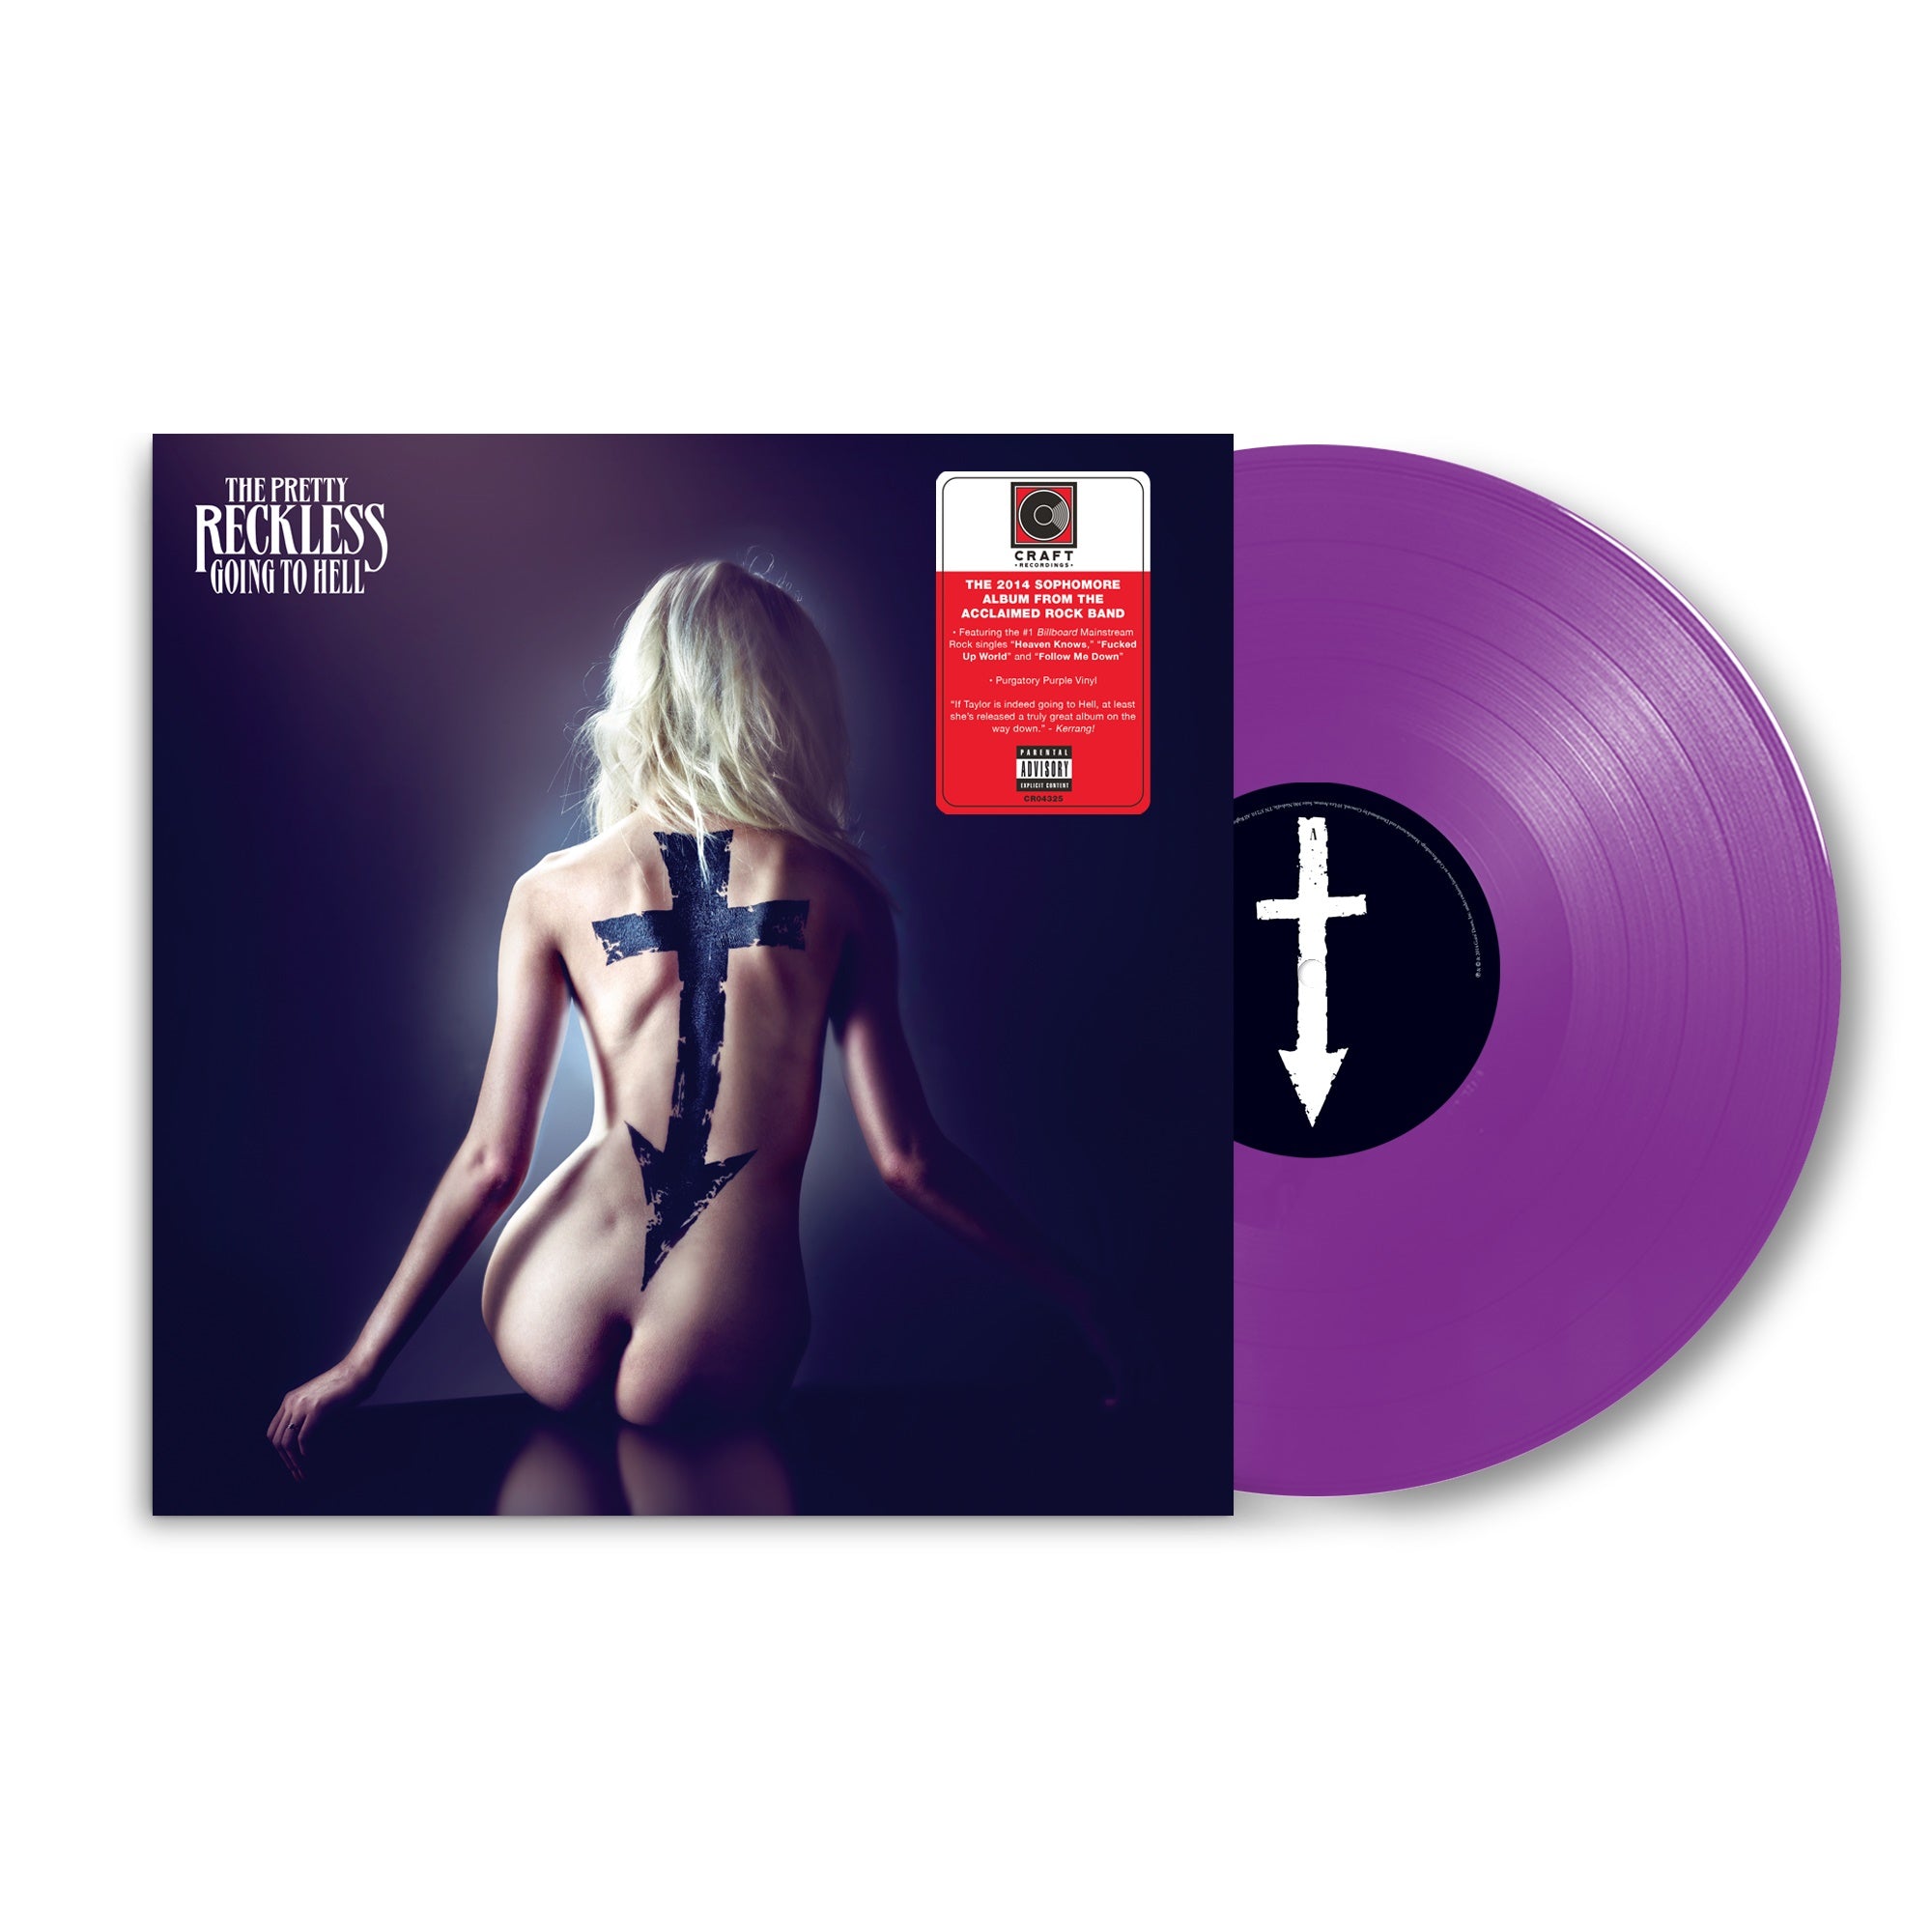 The Pretty Reckless | Going To Hell [Explicit Content] (Colored Vinyl, Purgatory Purple, Indie Exclusive) | Vinyl